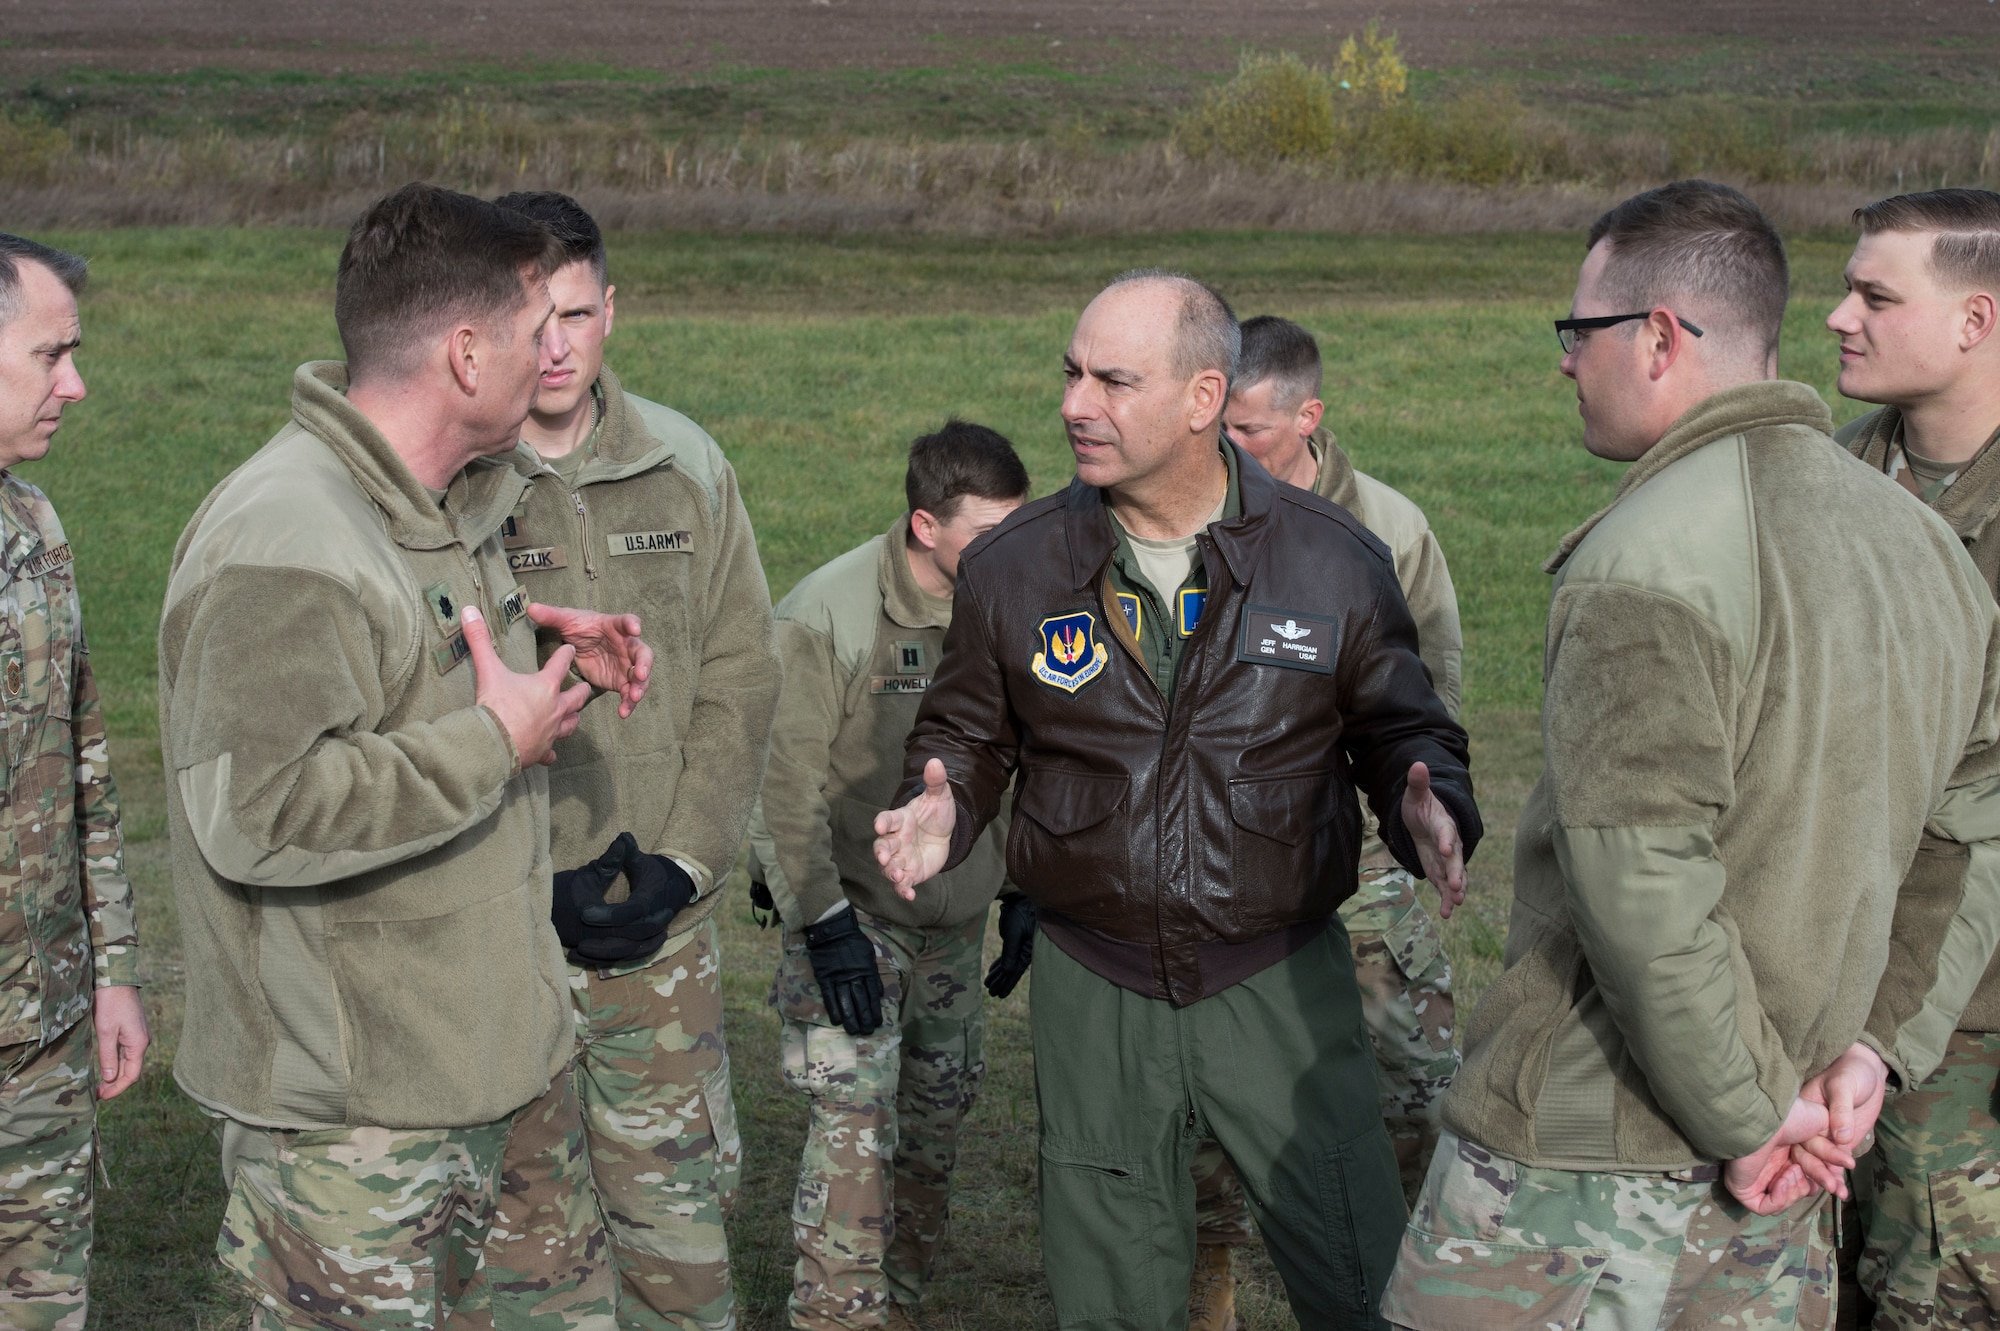 Gen. Jeff Harrigian, U.S. Air Forces in Europe and Air Forces Africa commander, discusses the Patriot Missile System with Soldiers from the 5th Battalion, 7th Air Defense Artillery Regiment, Baumholder, Germany, at Ramstein Air Base, Germany, Nov. 6, 2019. Soldiers from the 5-7 ADA are completing their Table VIII certification and demonstrating their ability to deploy this defensive capability anytime, anywhere. (U.S. Air Force photo by Tech. Sgt Stephen Ocenosak)